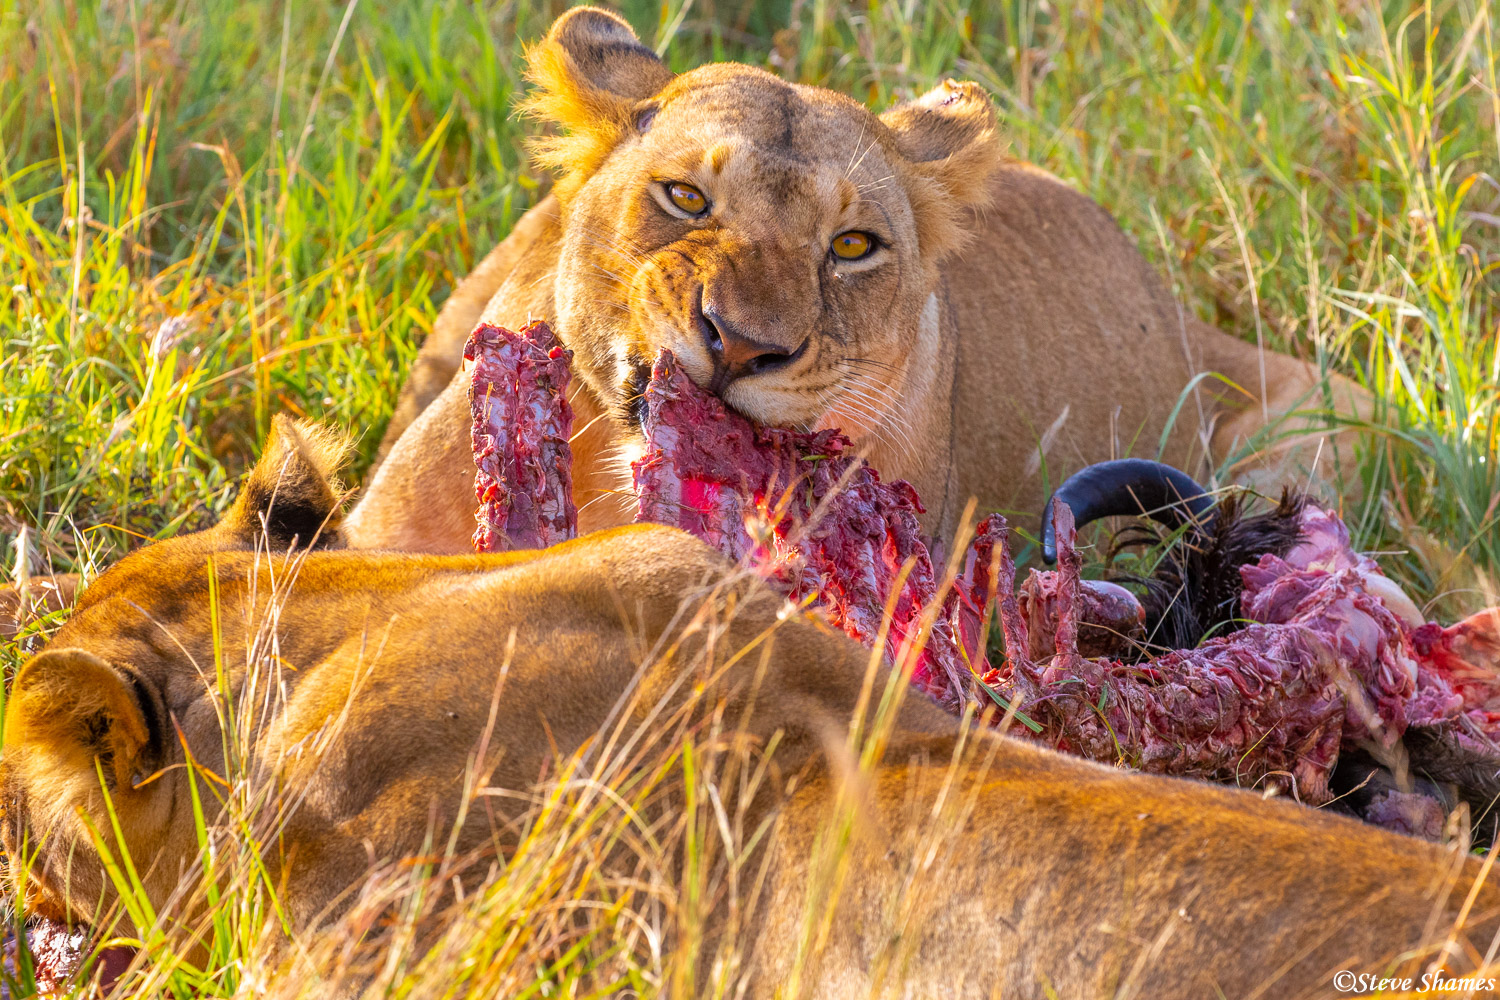 Lioness crunching on some ribs in the early morning.